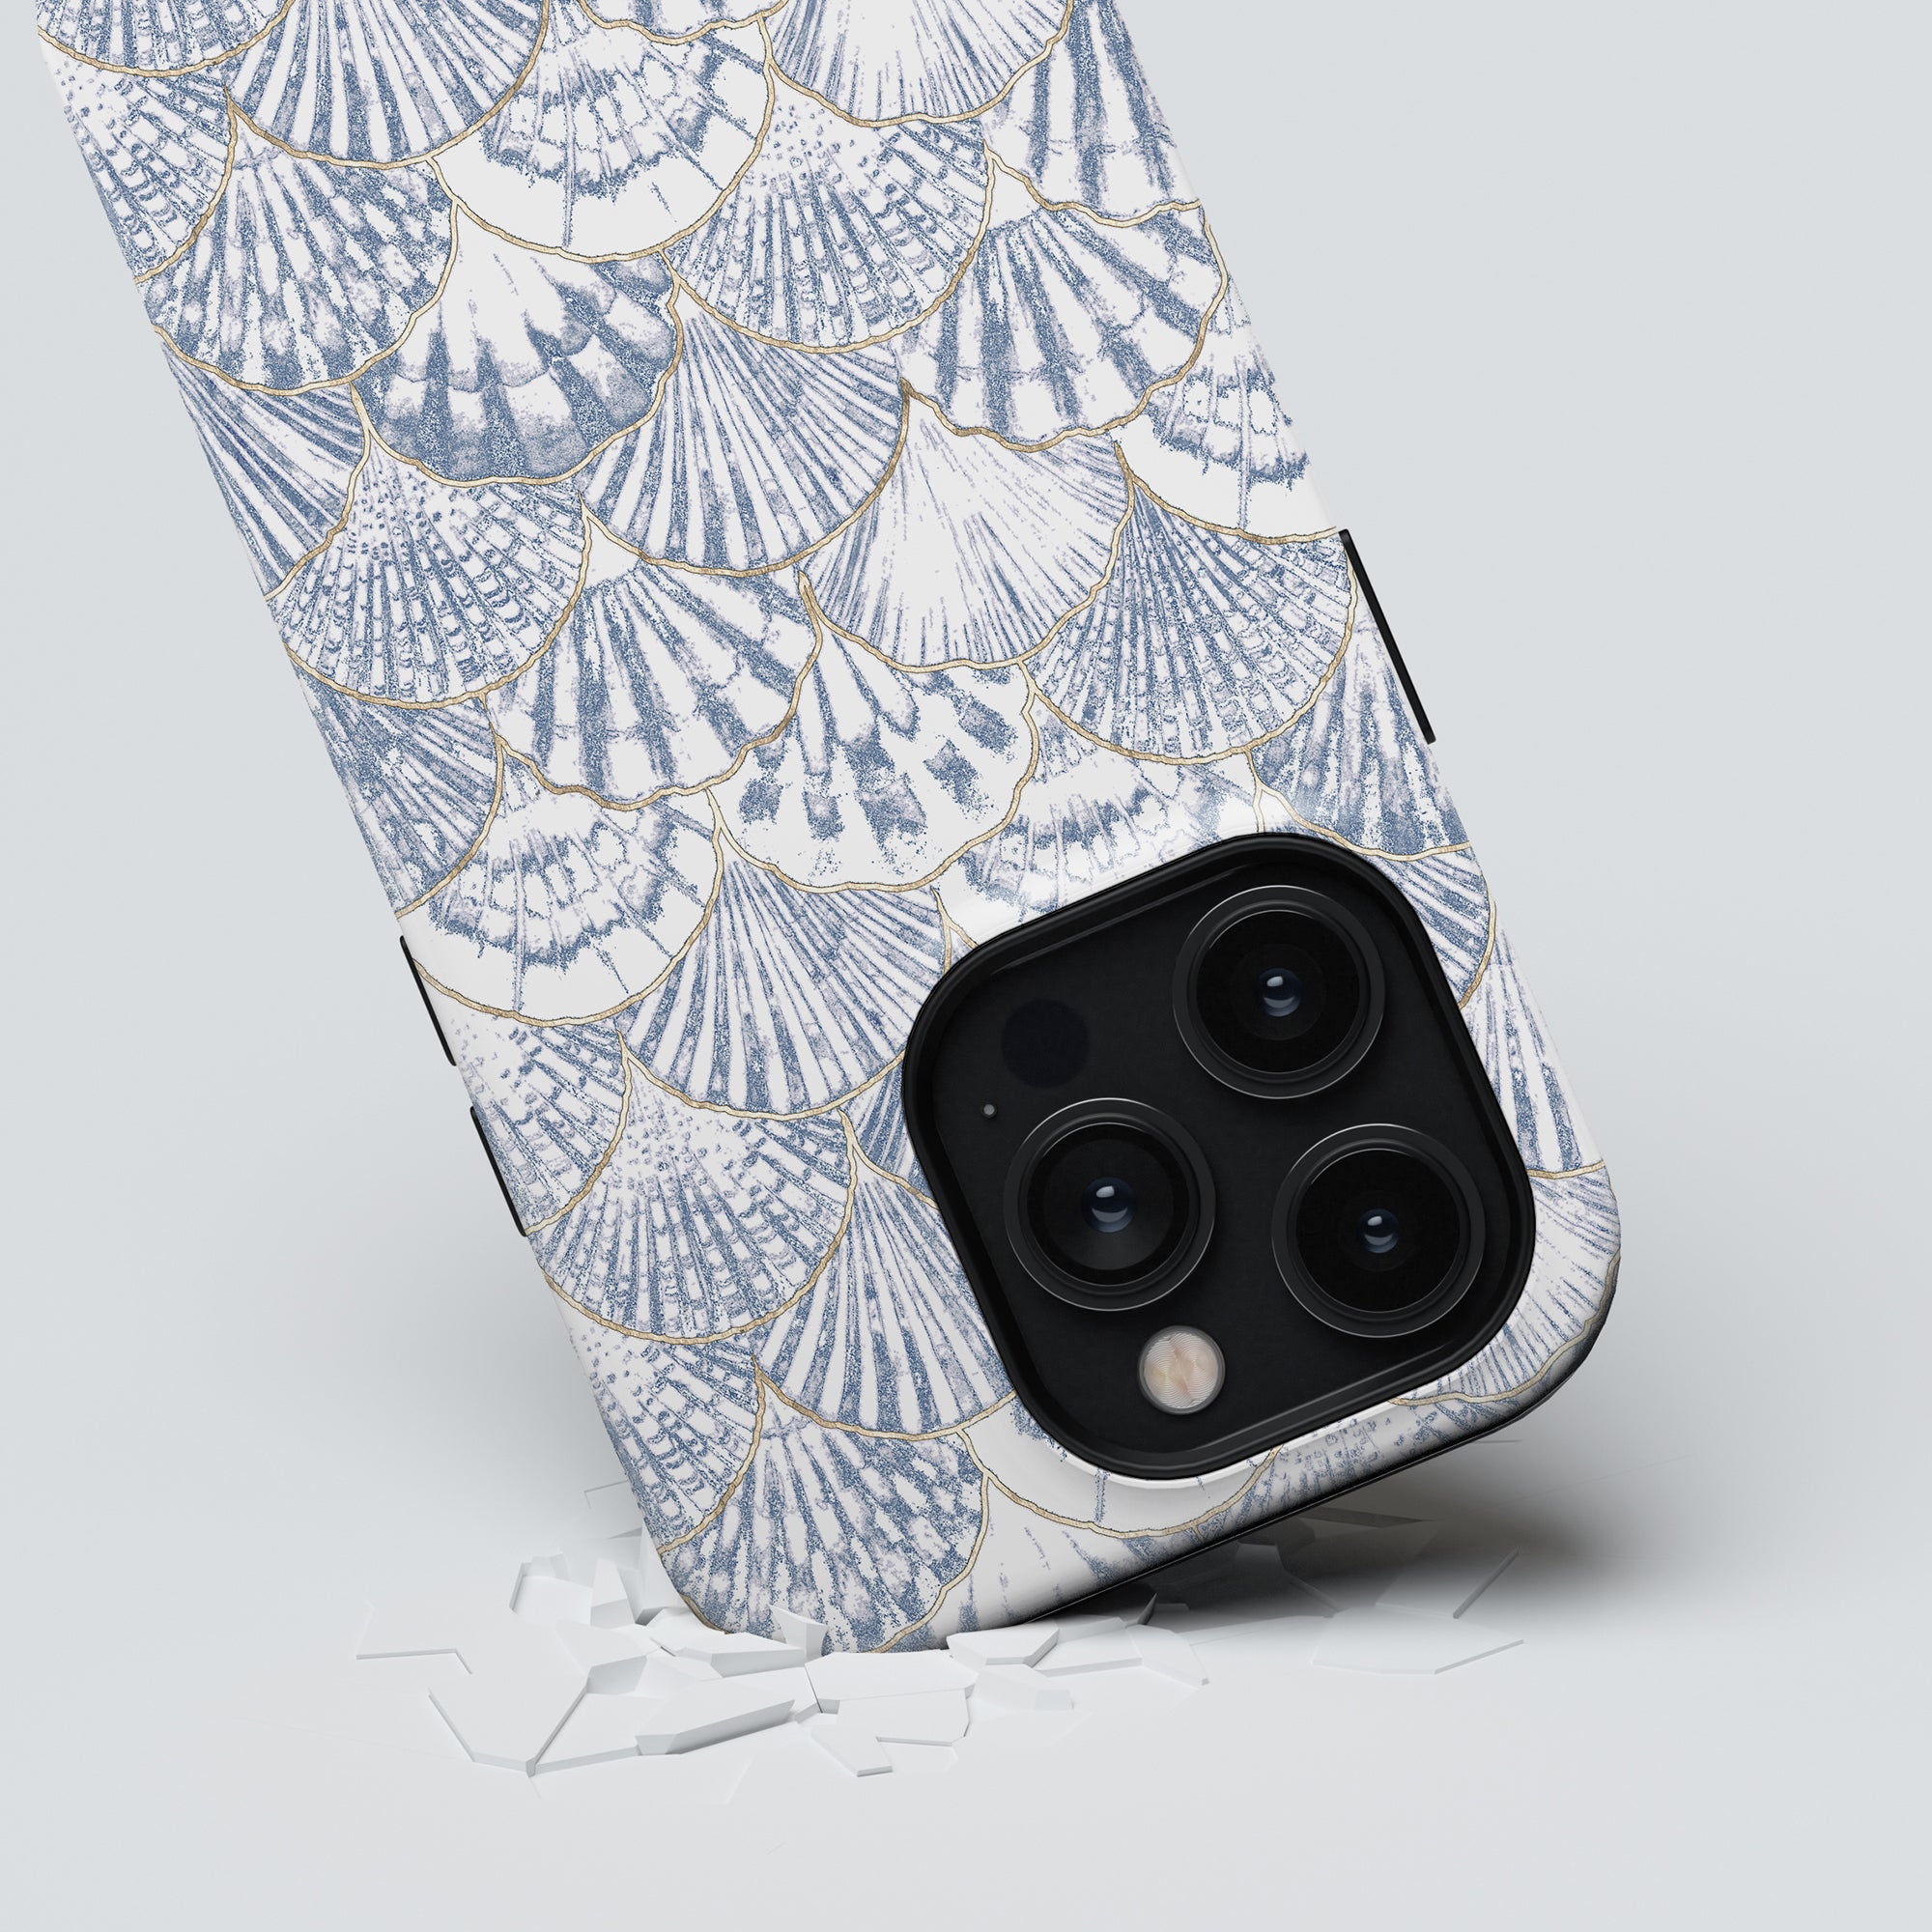 A smartphone with a Valencia - Tough Case from the Ocean Collection featuring a triple-lens camera breaking through glass.